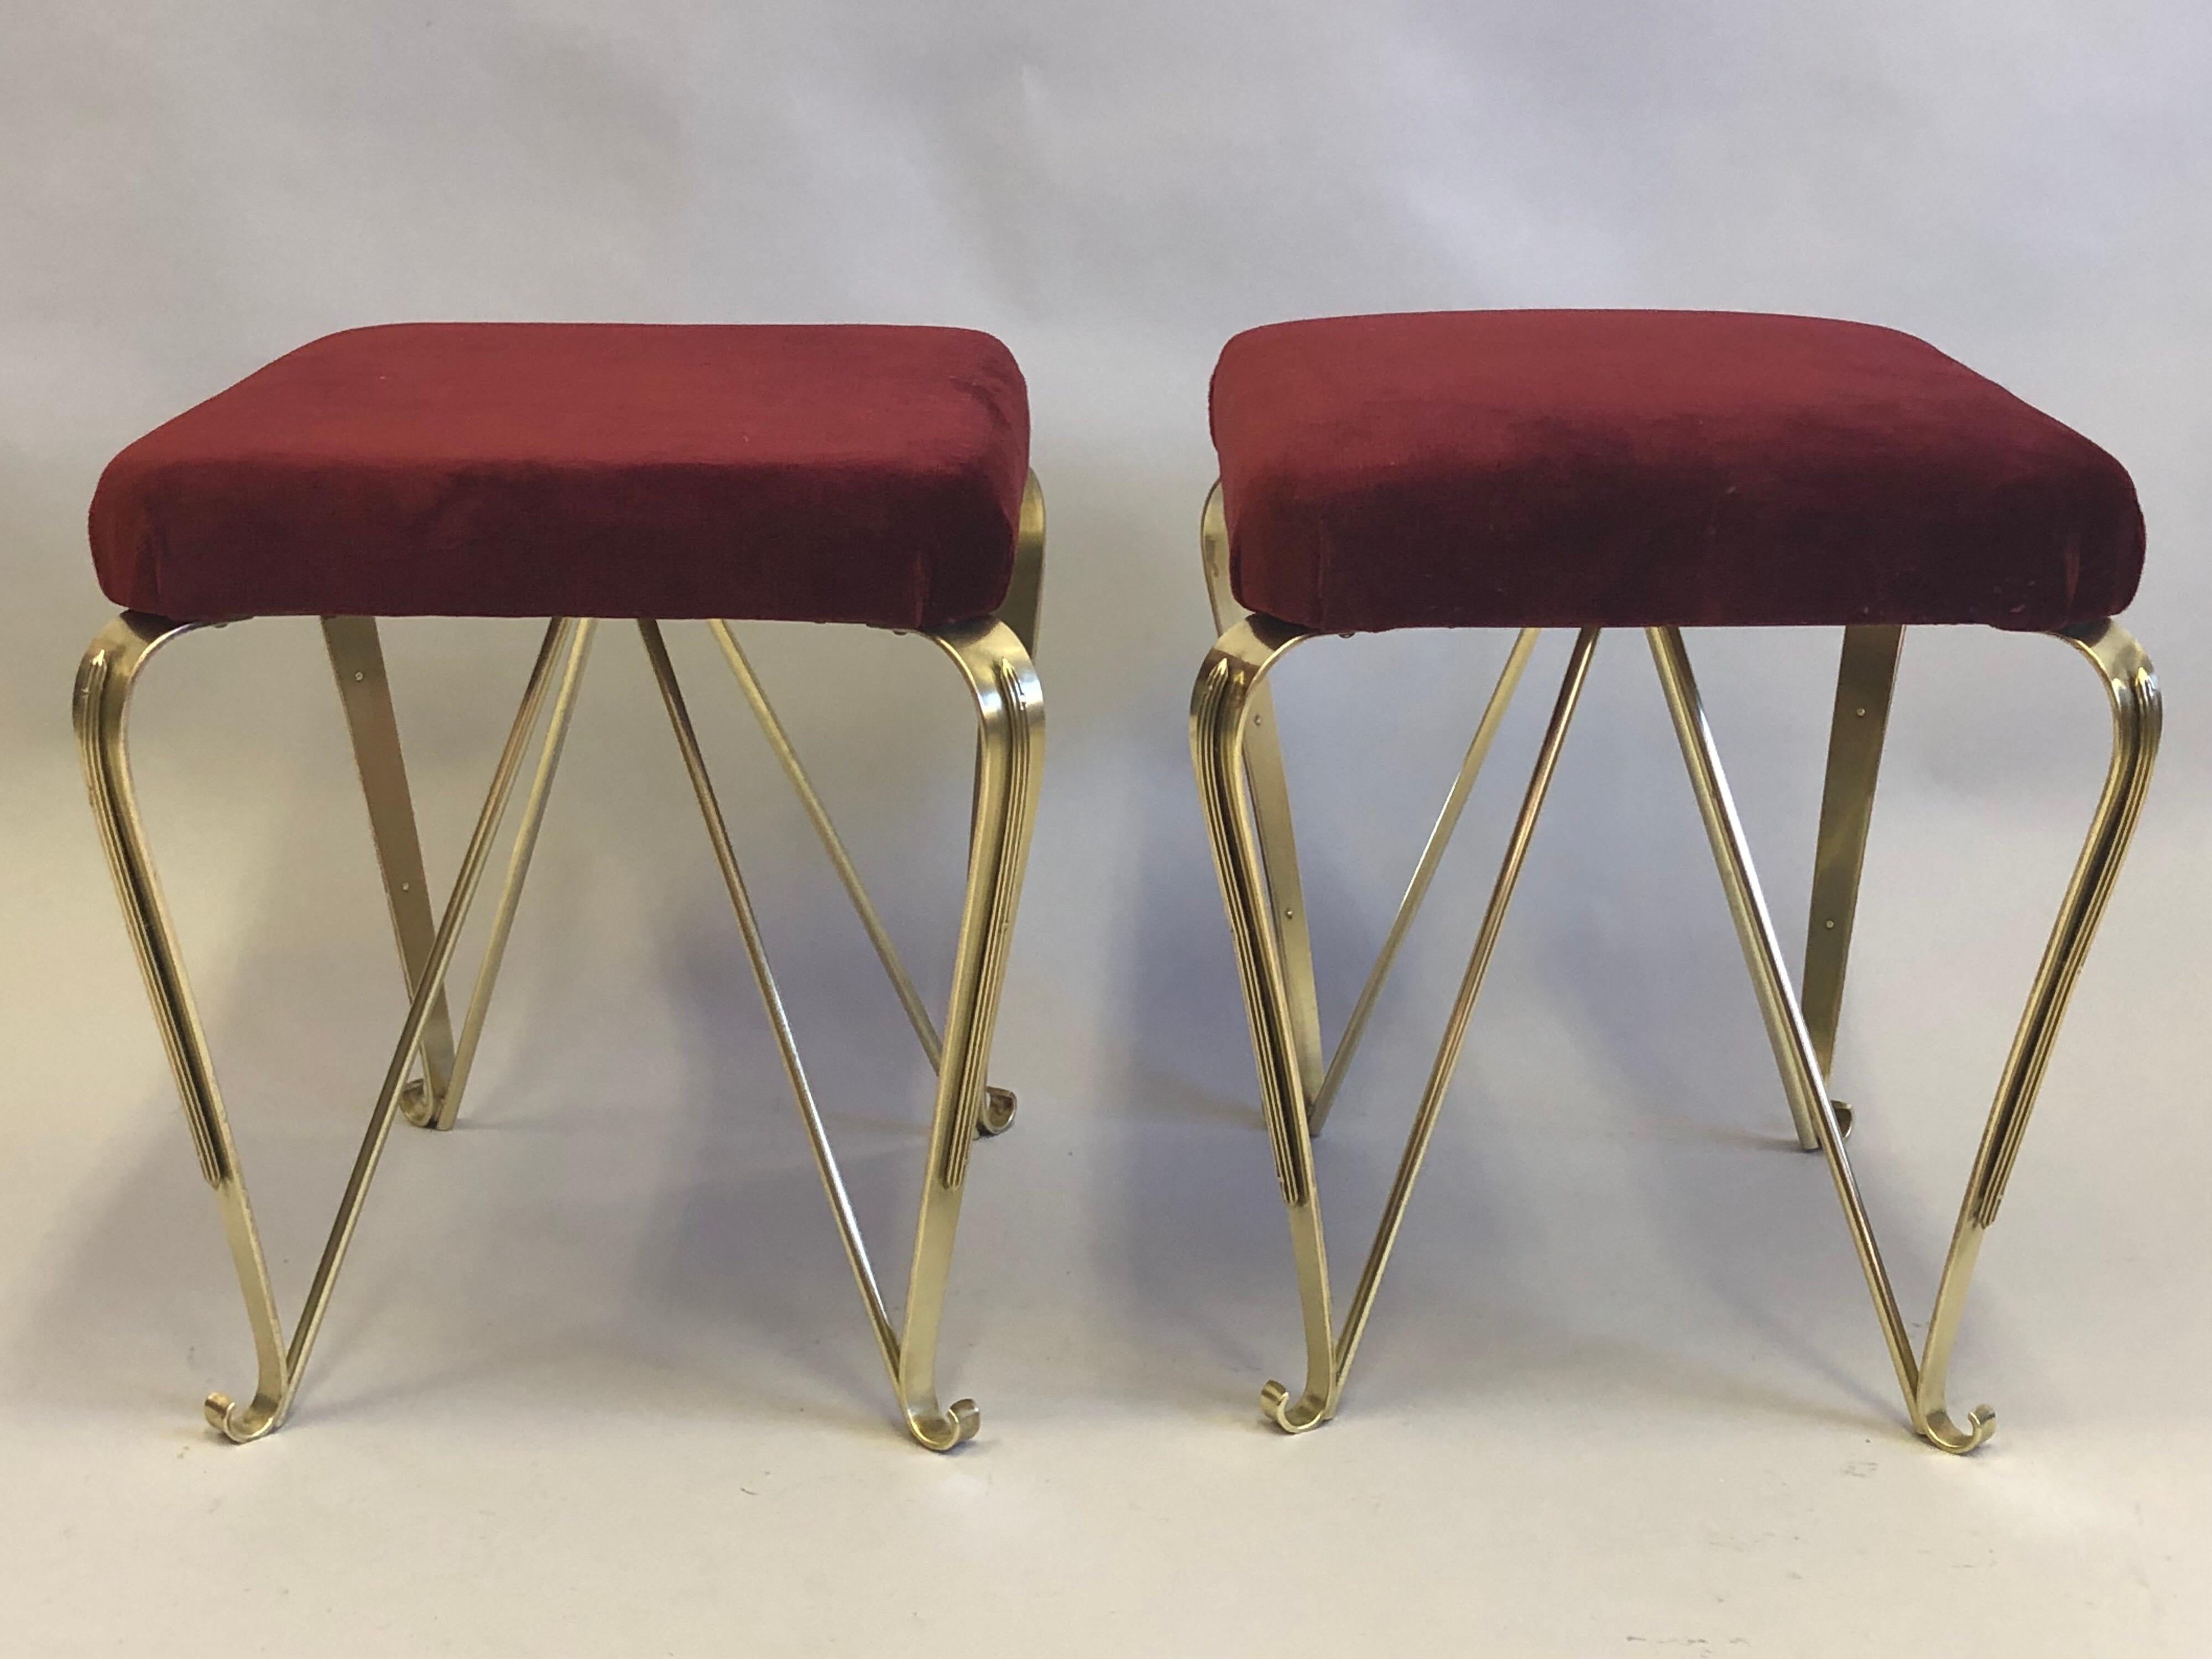 Pair of Italian Mid-Century Modern Neoclassical Solid Brass Benches by Jansen For Sale 3